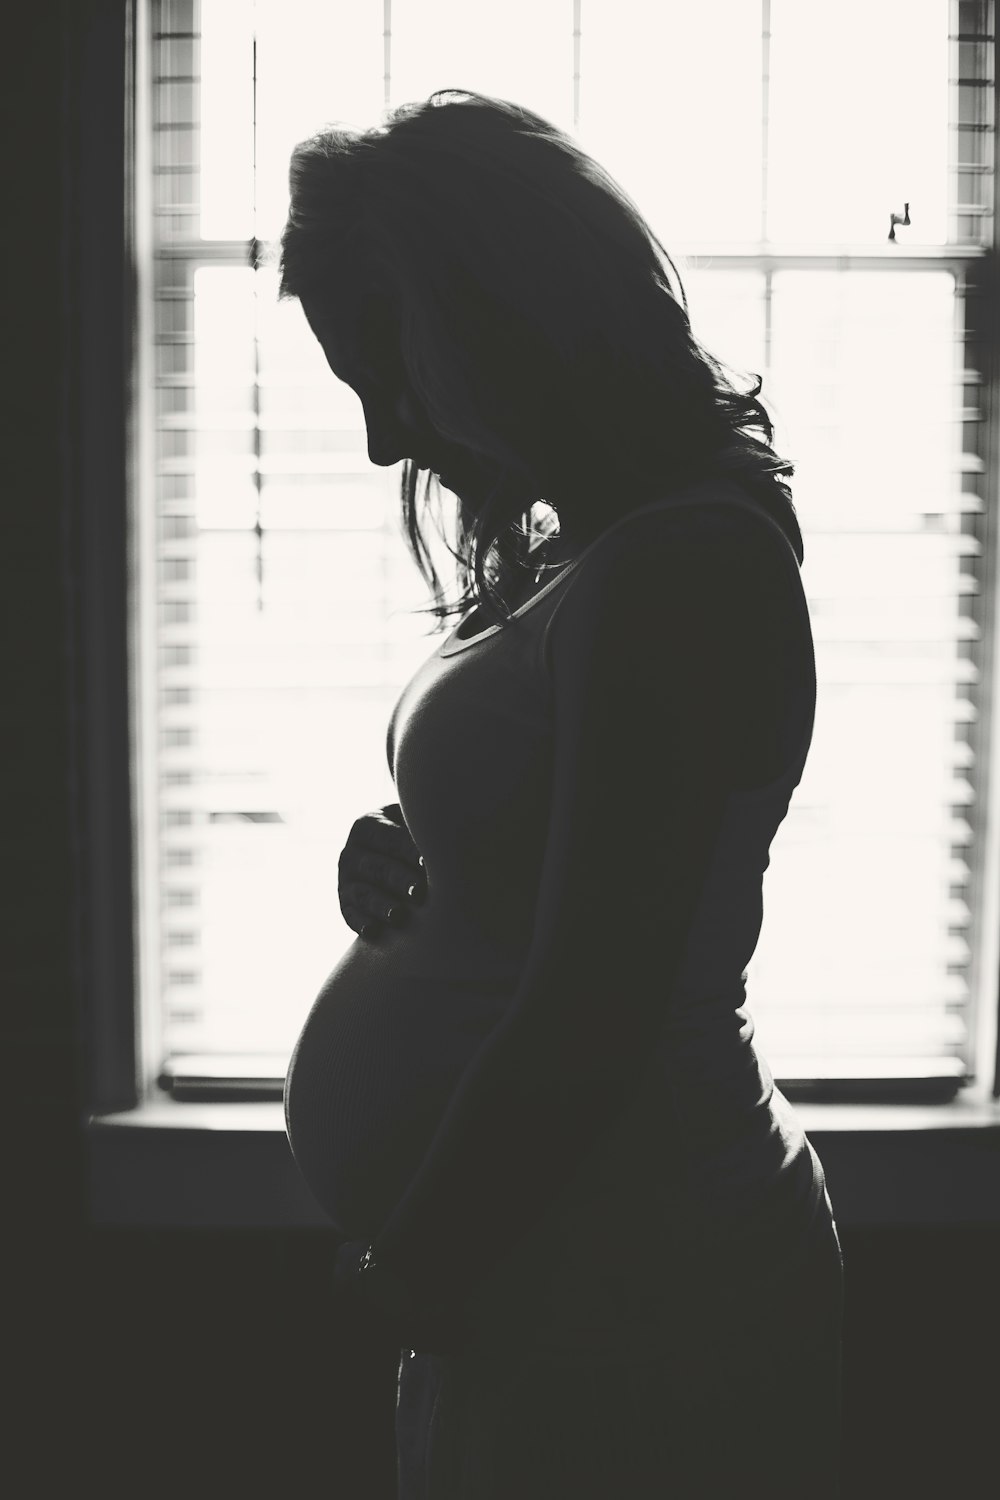 A black and white silhouette of a pregnant woman looking down and holding her belly in front of a window.